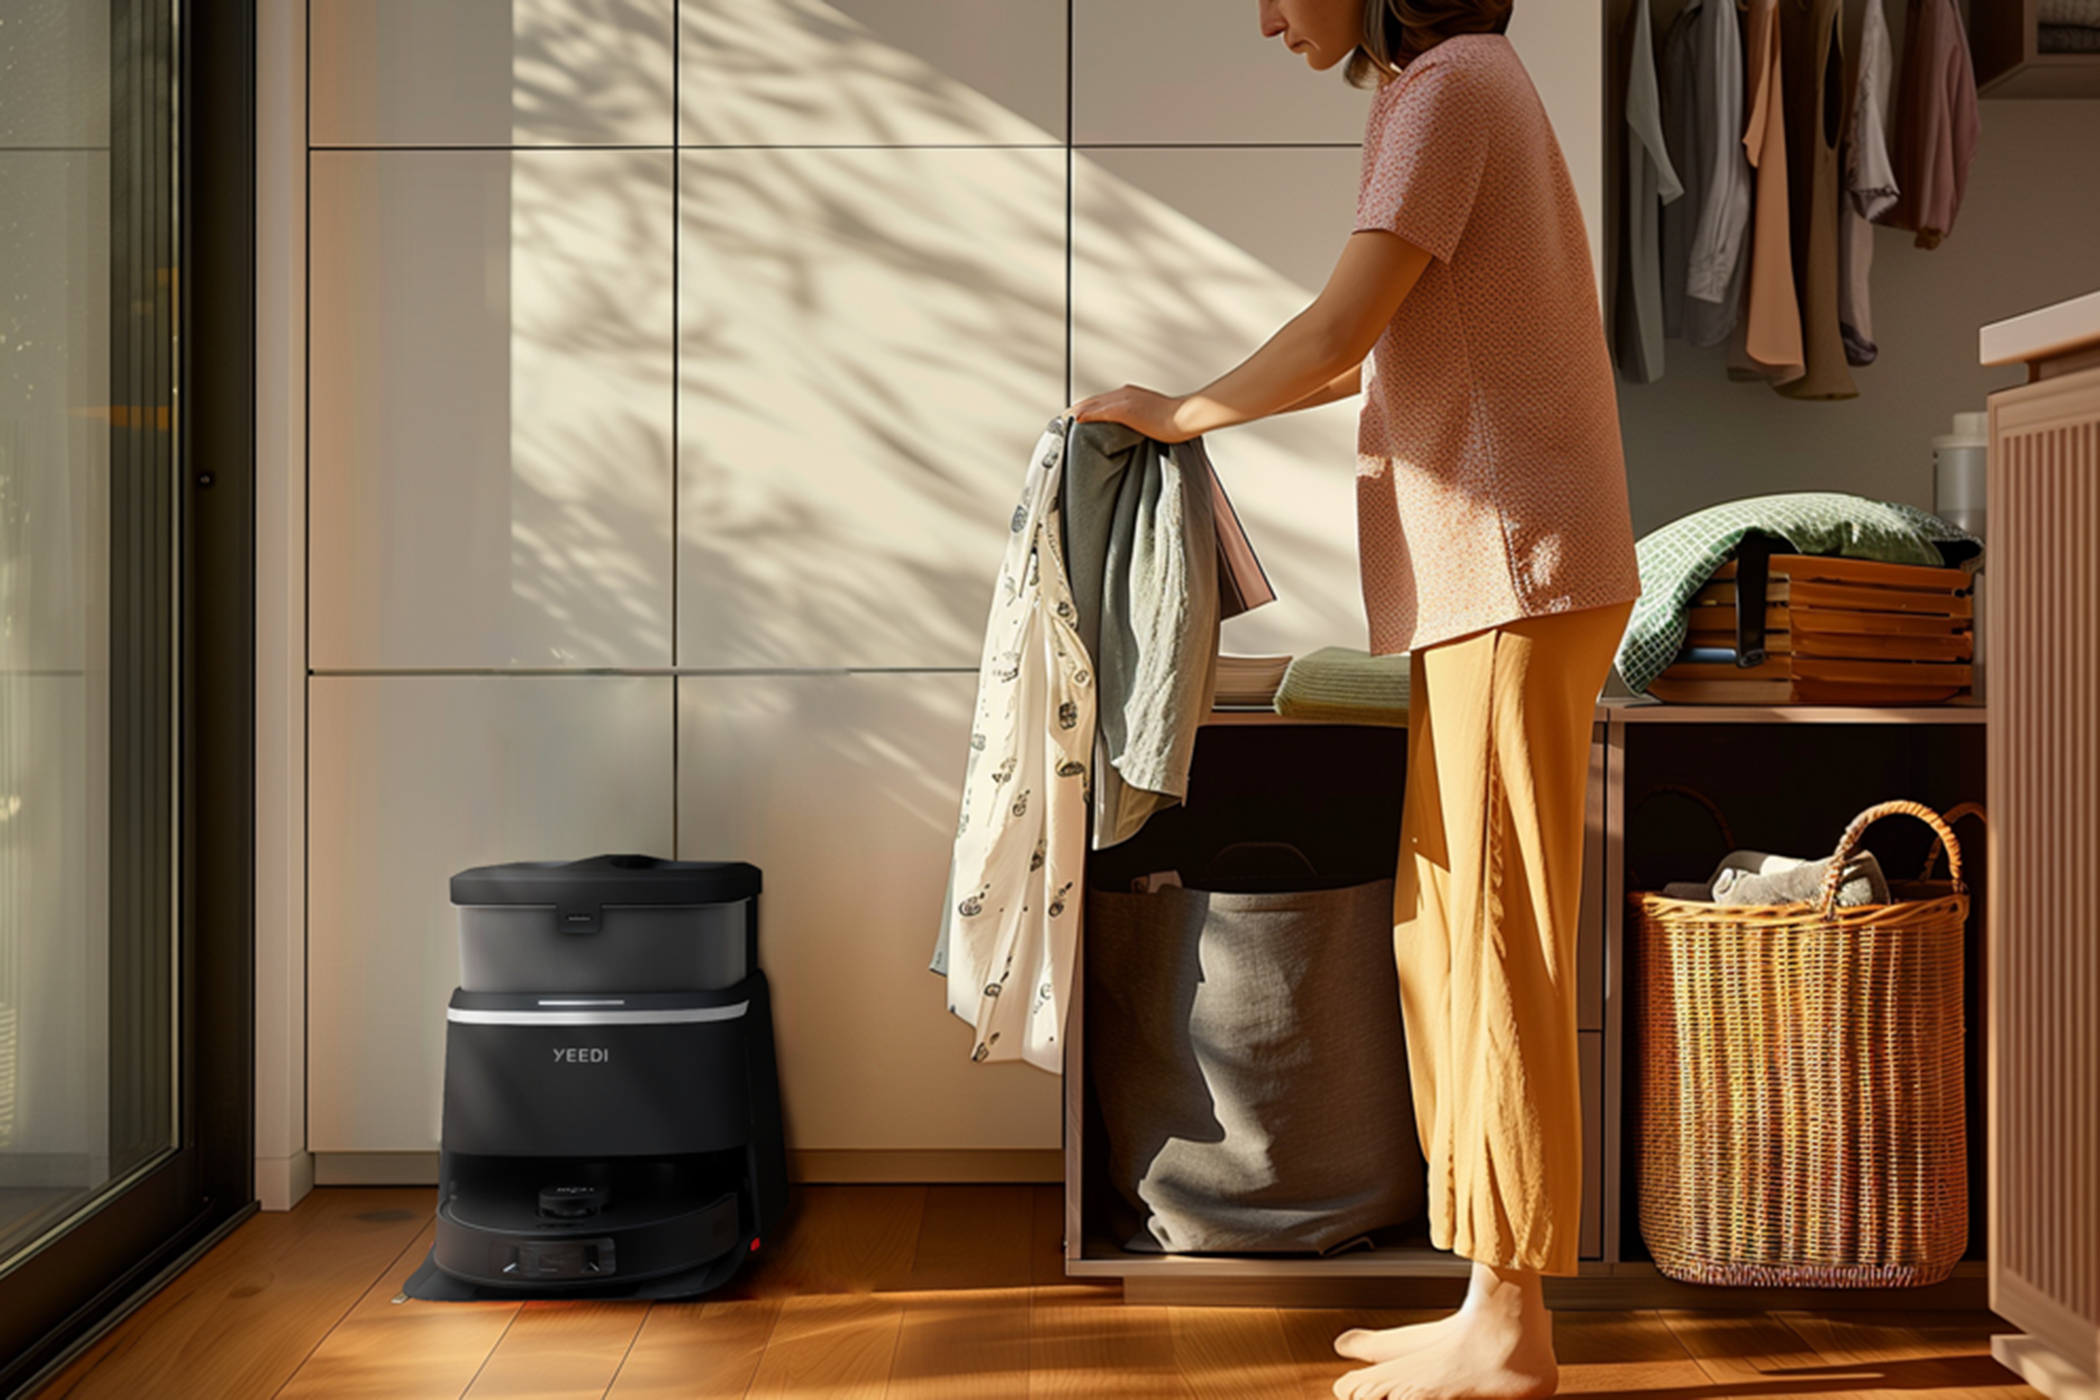 A woman organizes laundry beside her robot vacuum